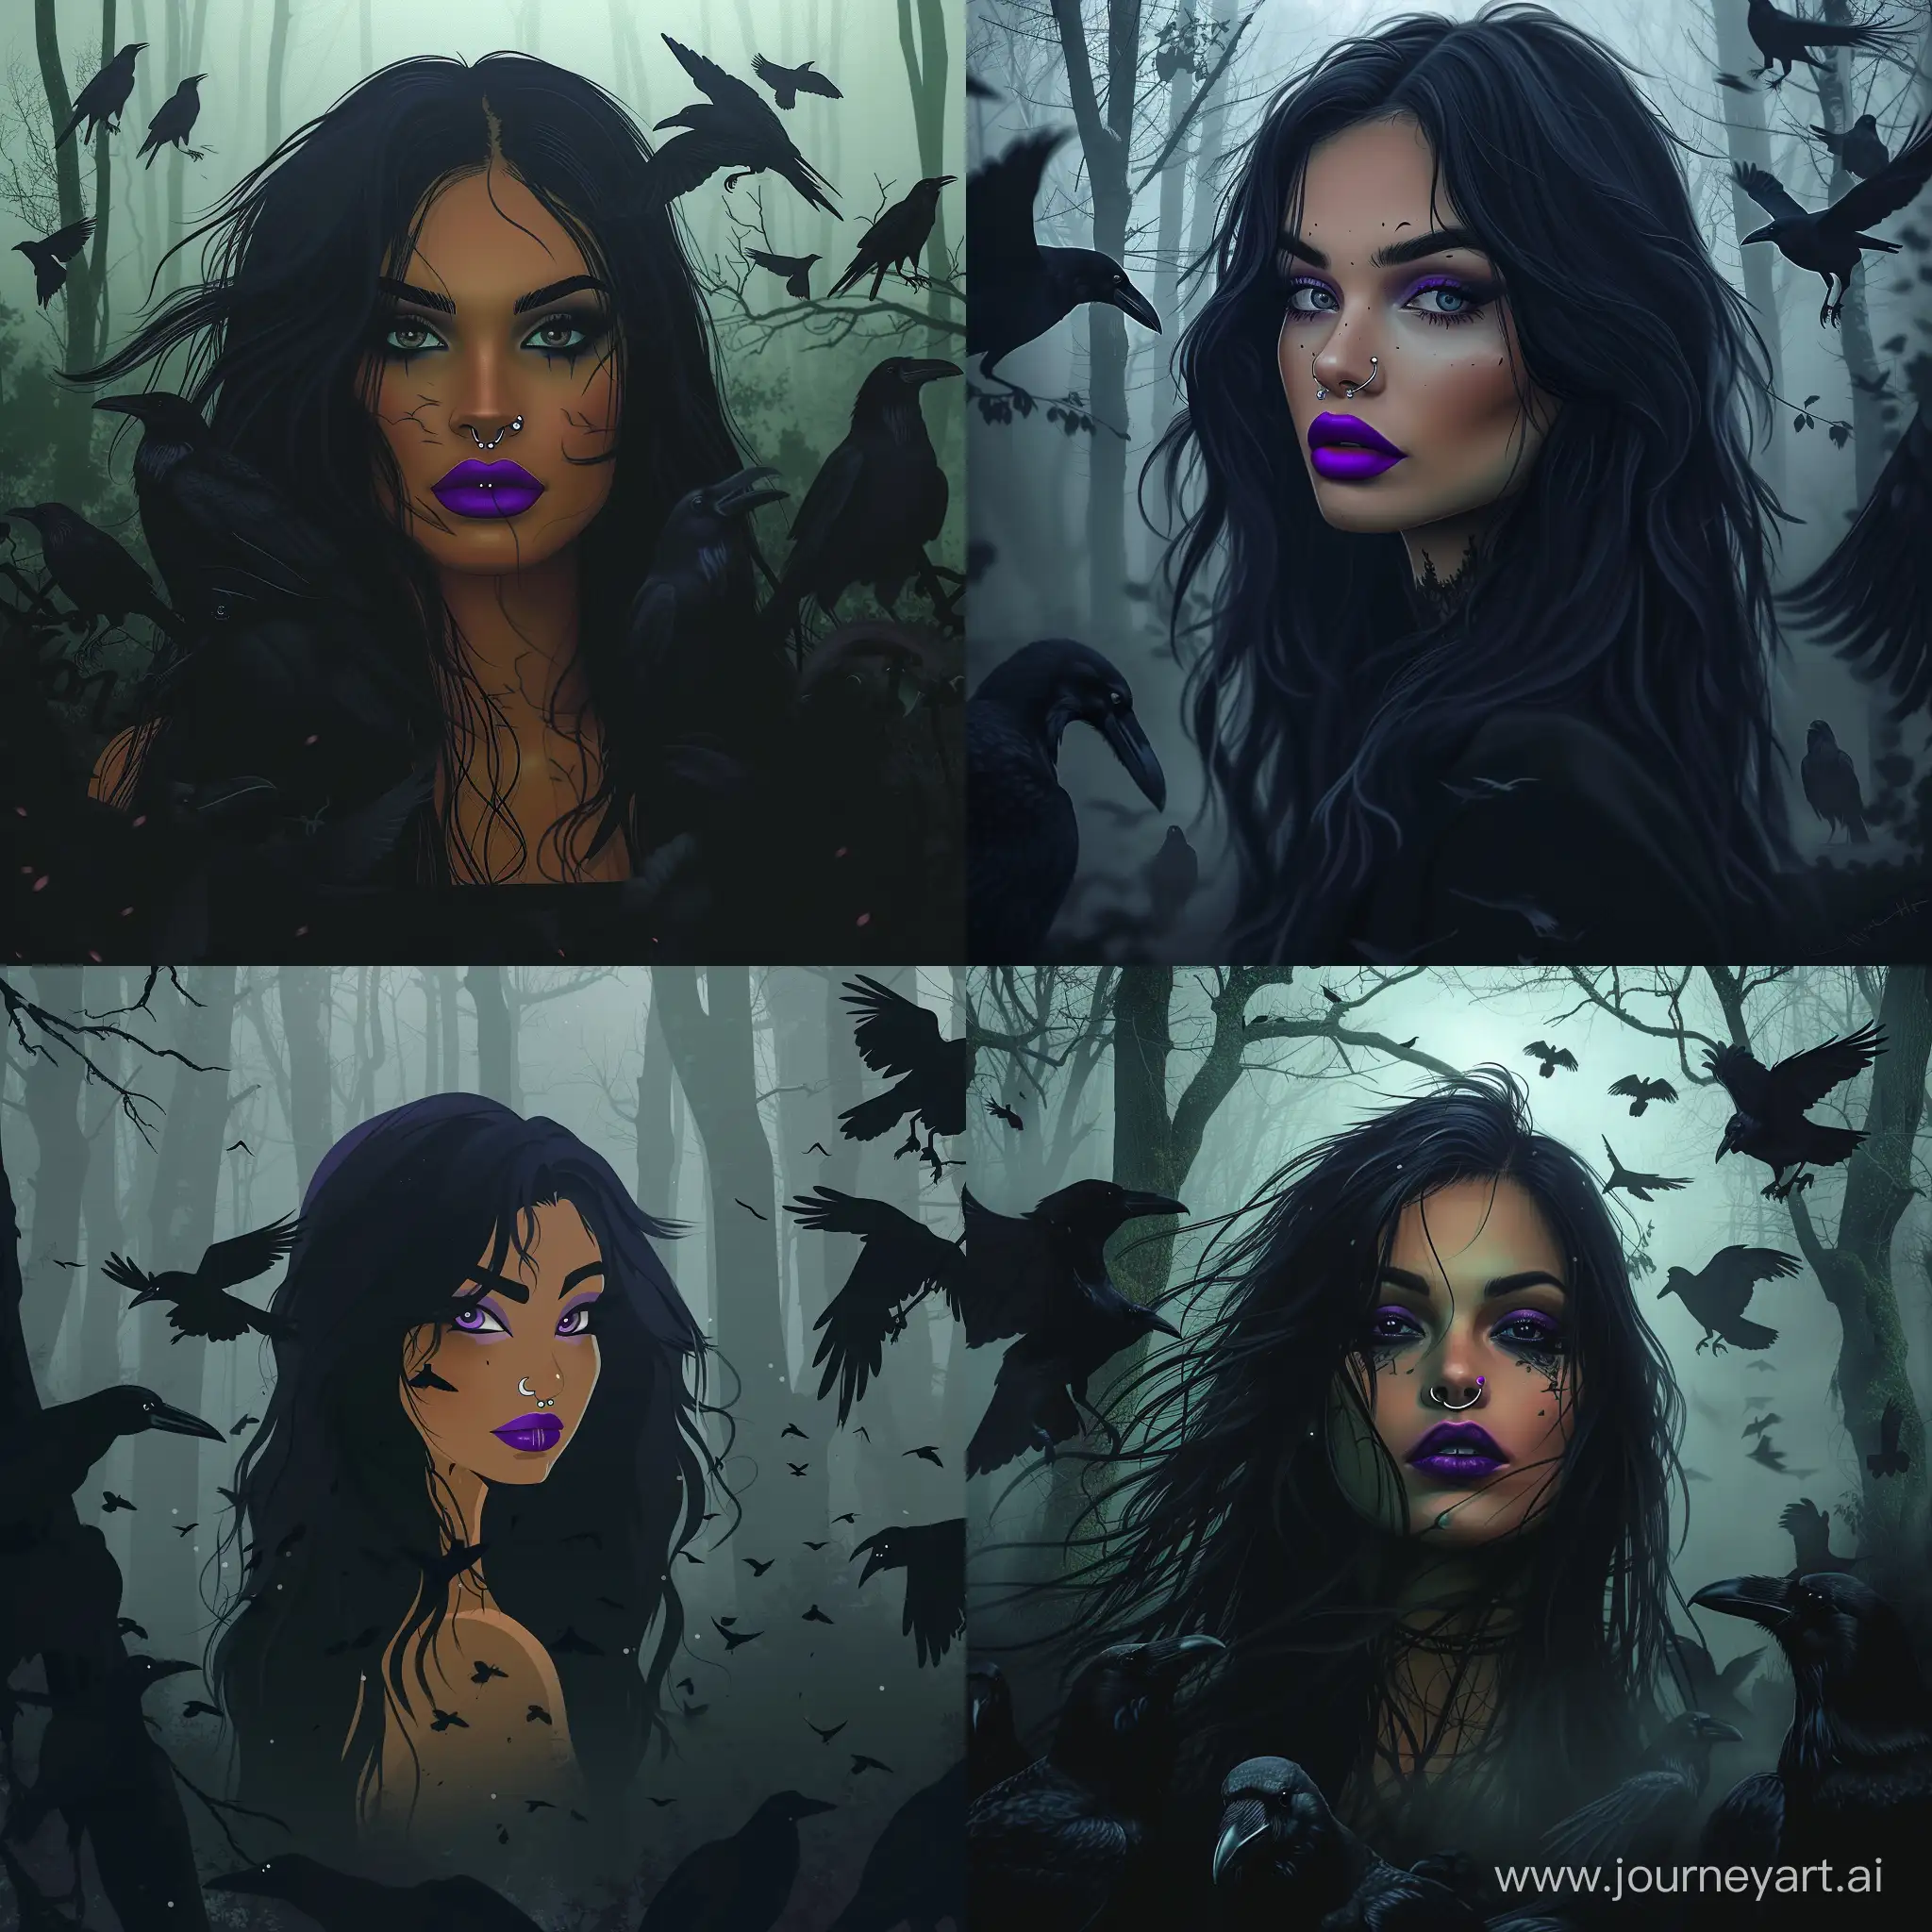 Mystic-Elegance-Proud-BlackHaired-Woman-in-Enchanted-Forest-Surrounded-by-Ravens